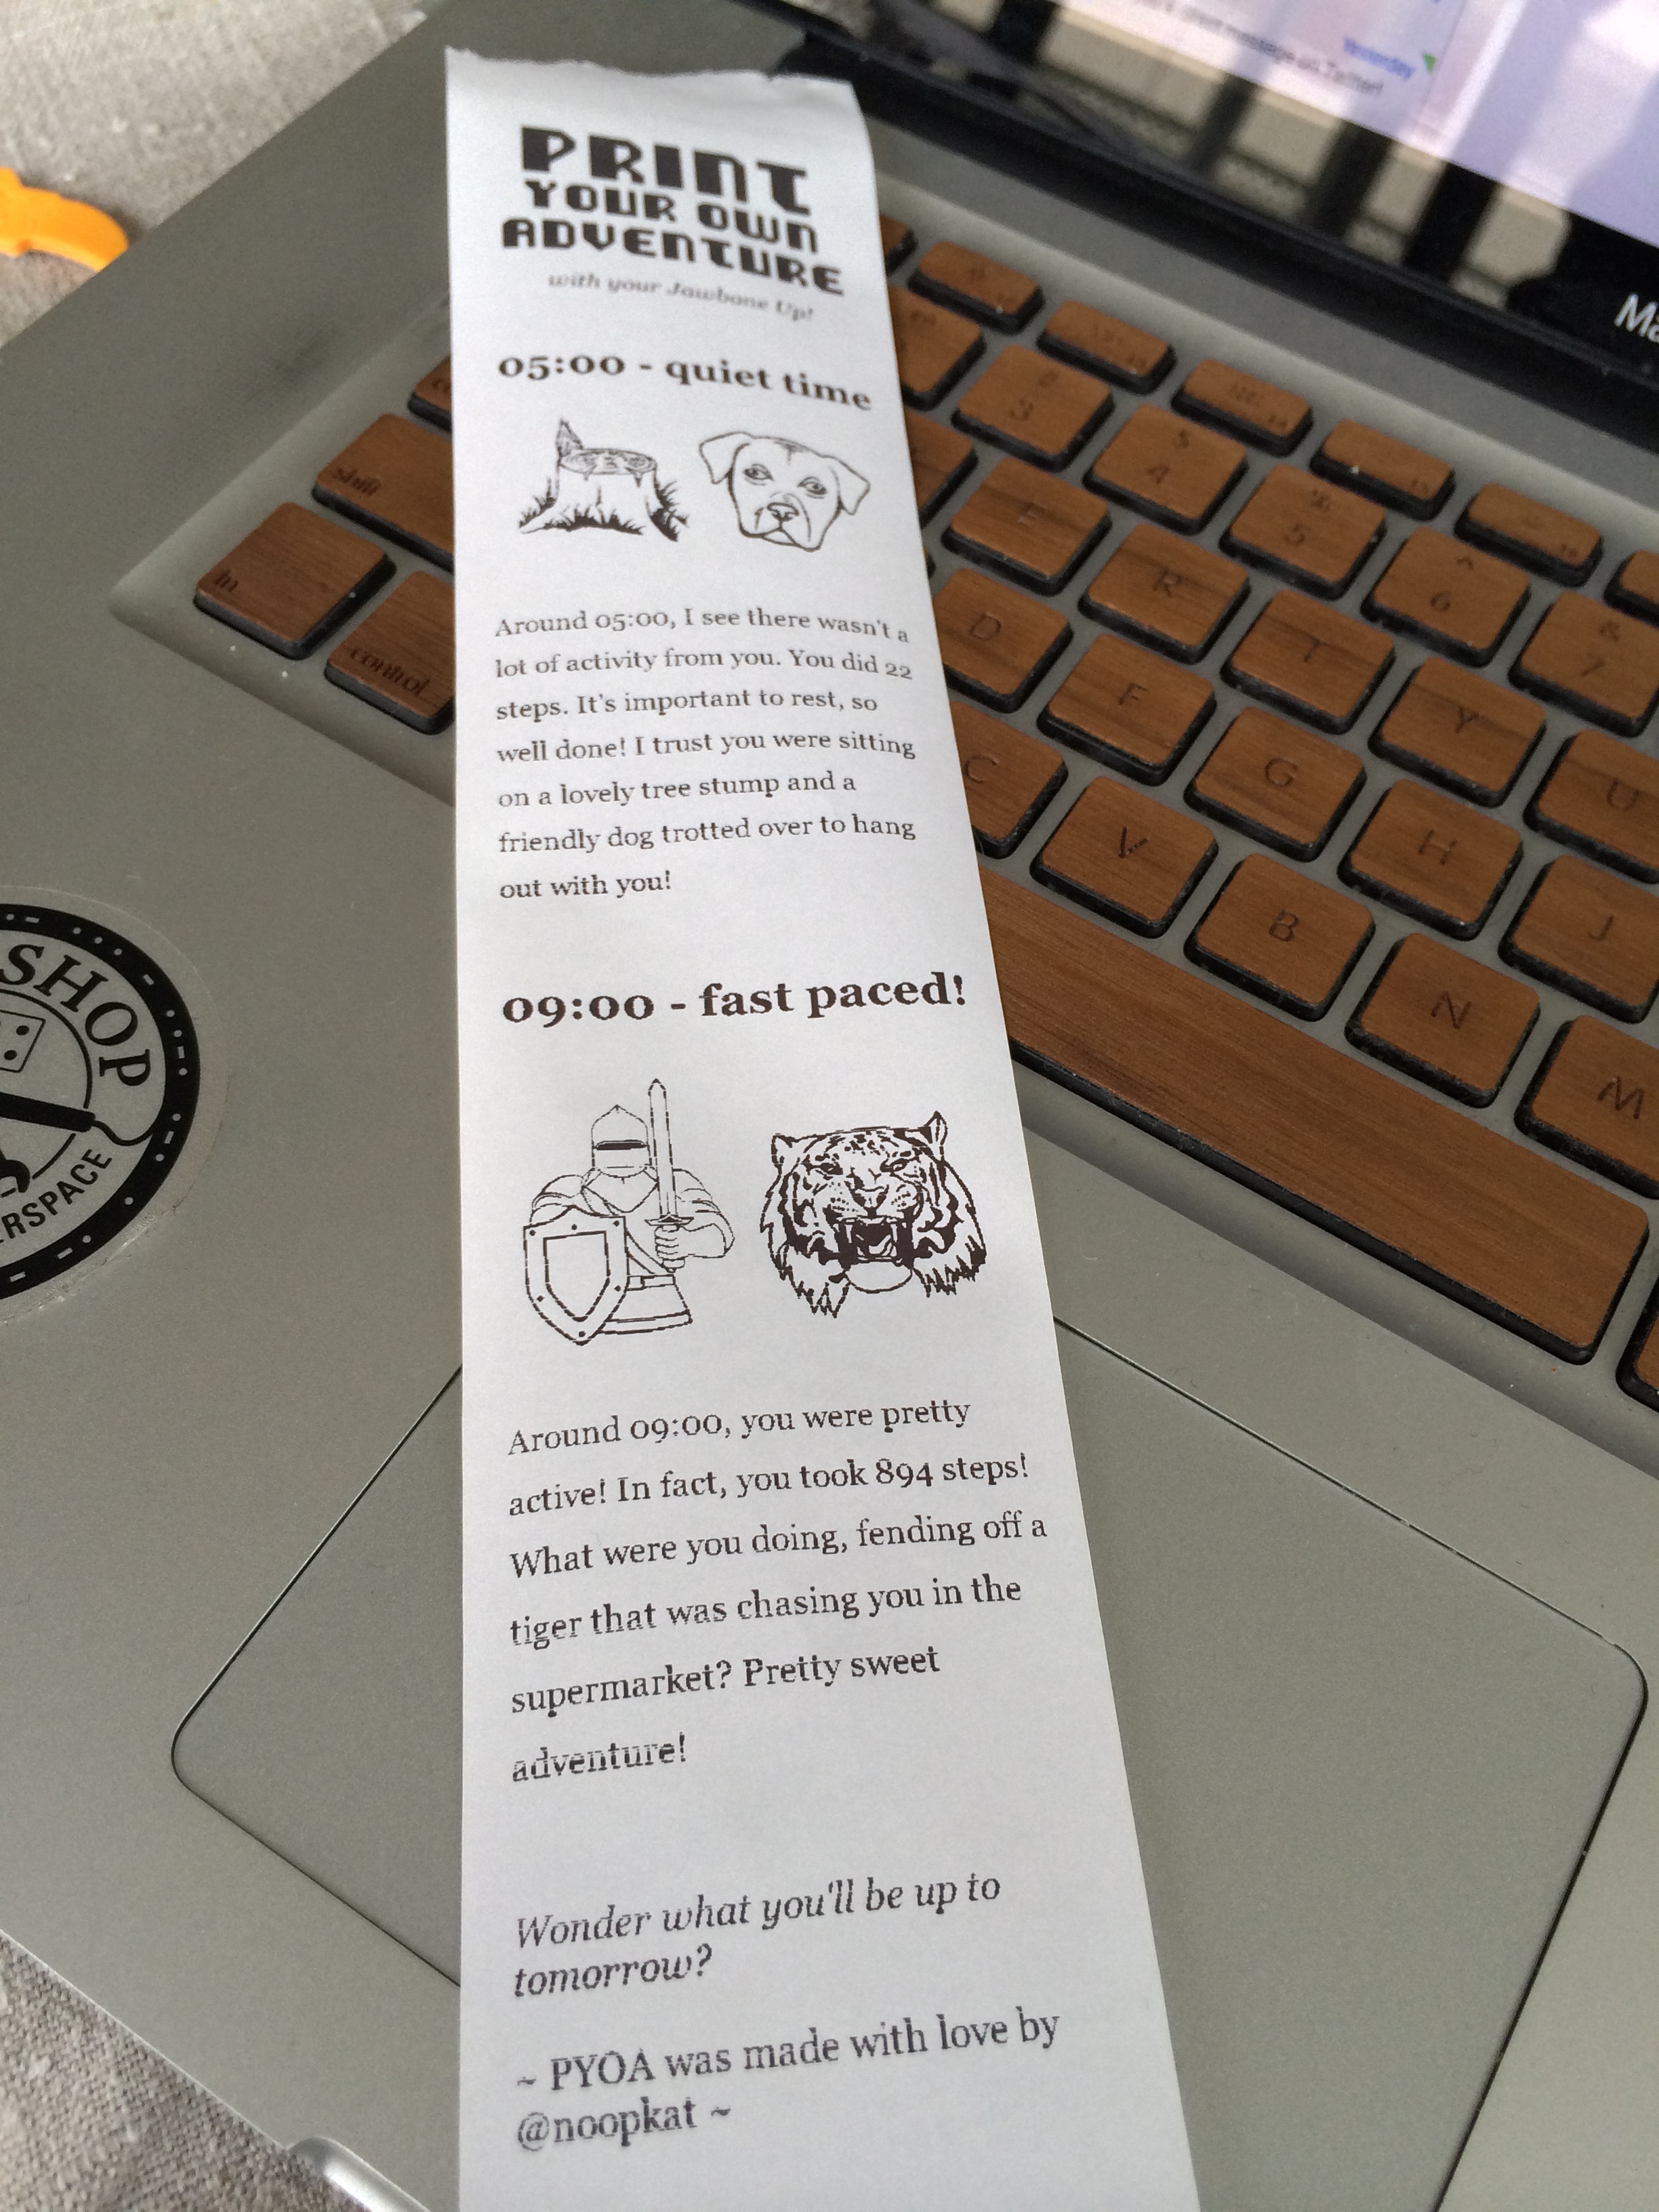 thermal printed roll of paper with images and text on it